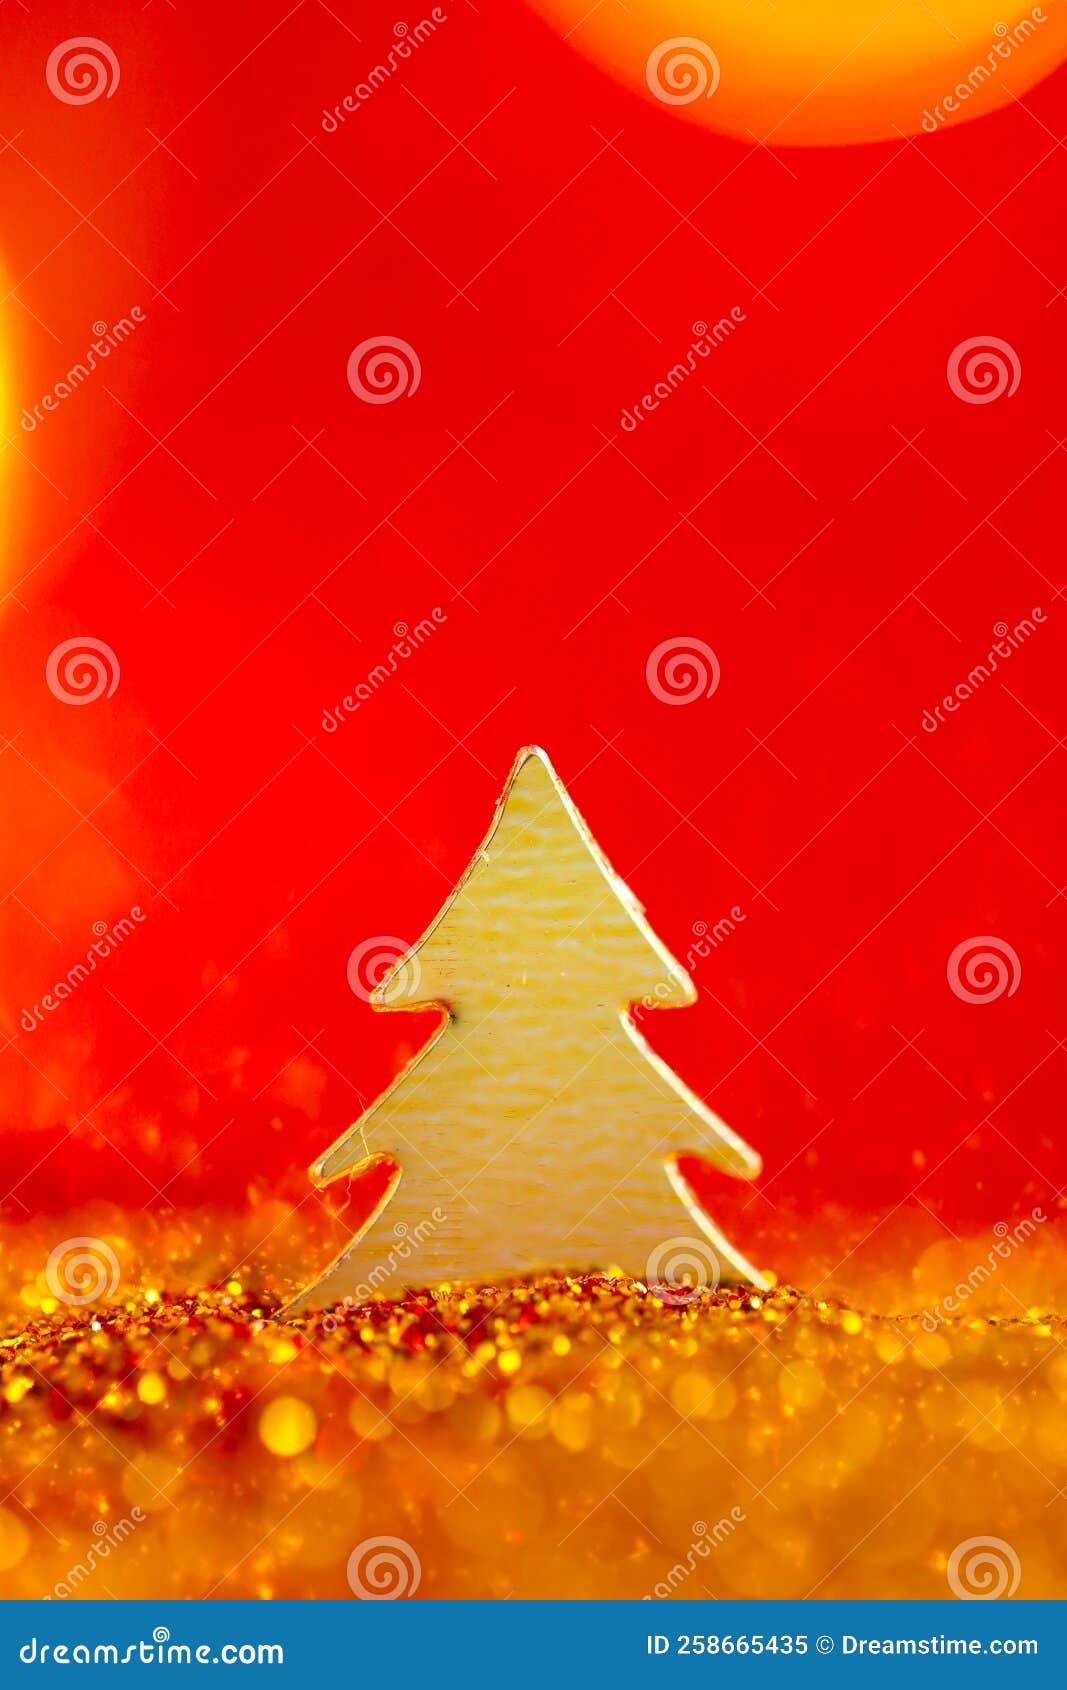 Christmas background holidays wallpaper